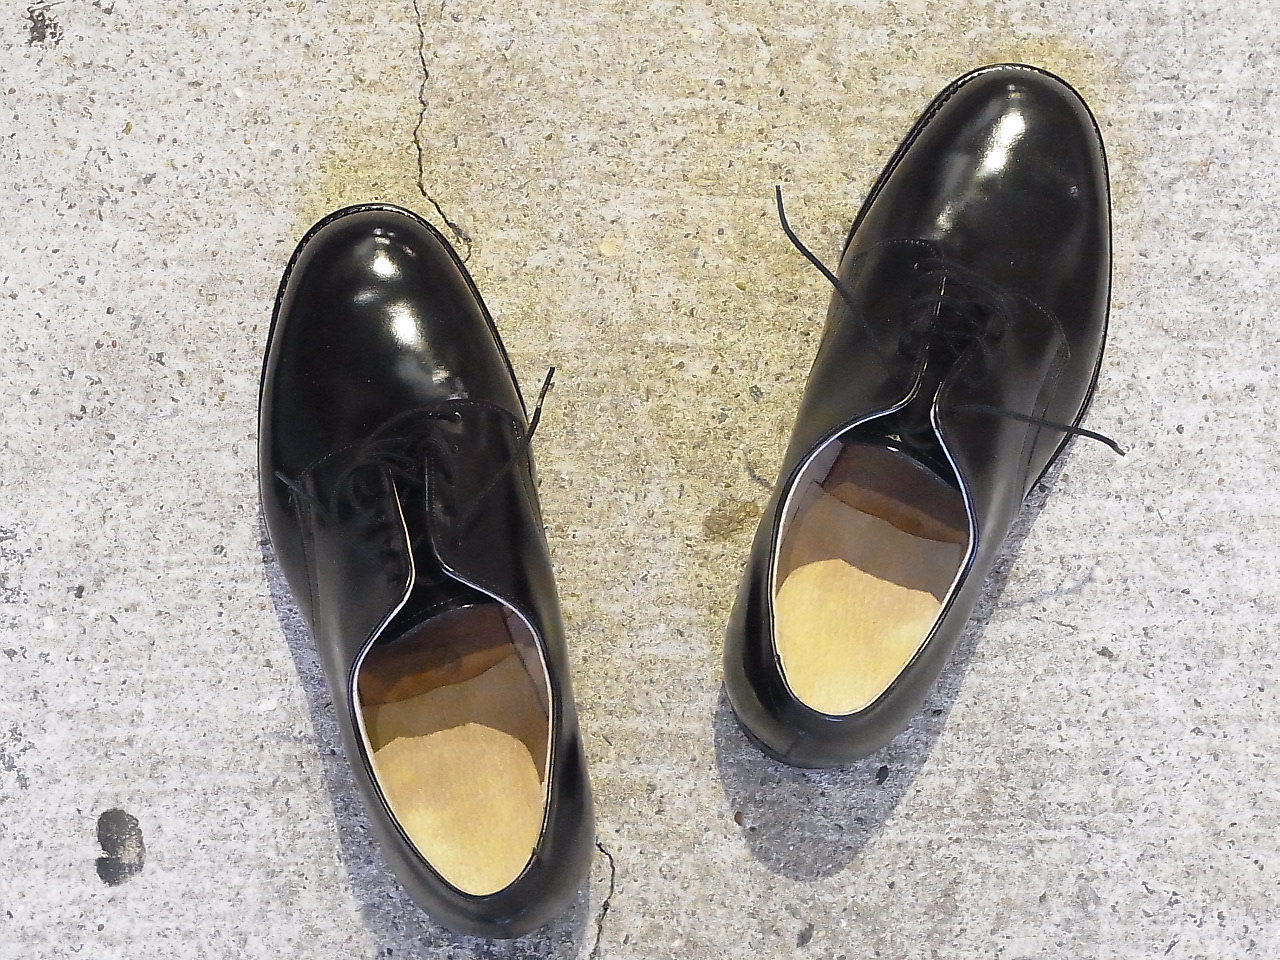 usnavy-service-shoes-deadstock-20180914-1